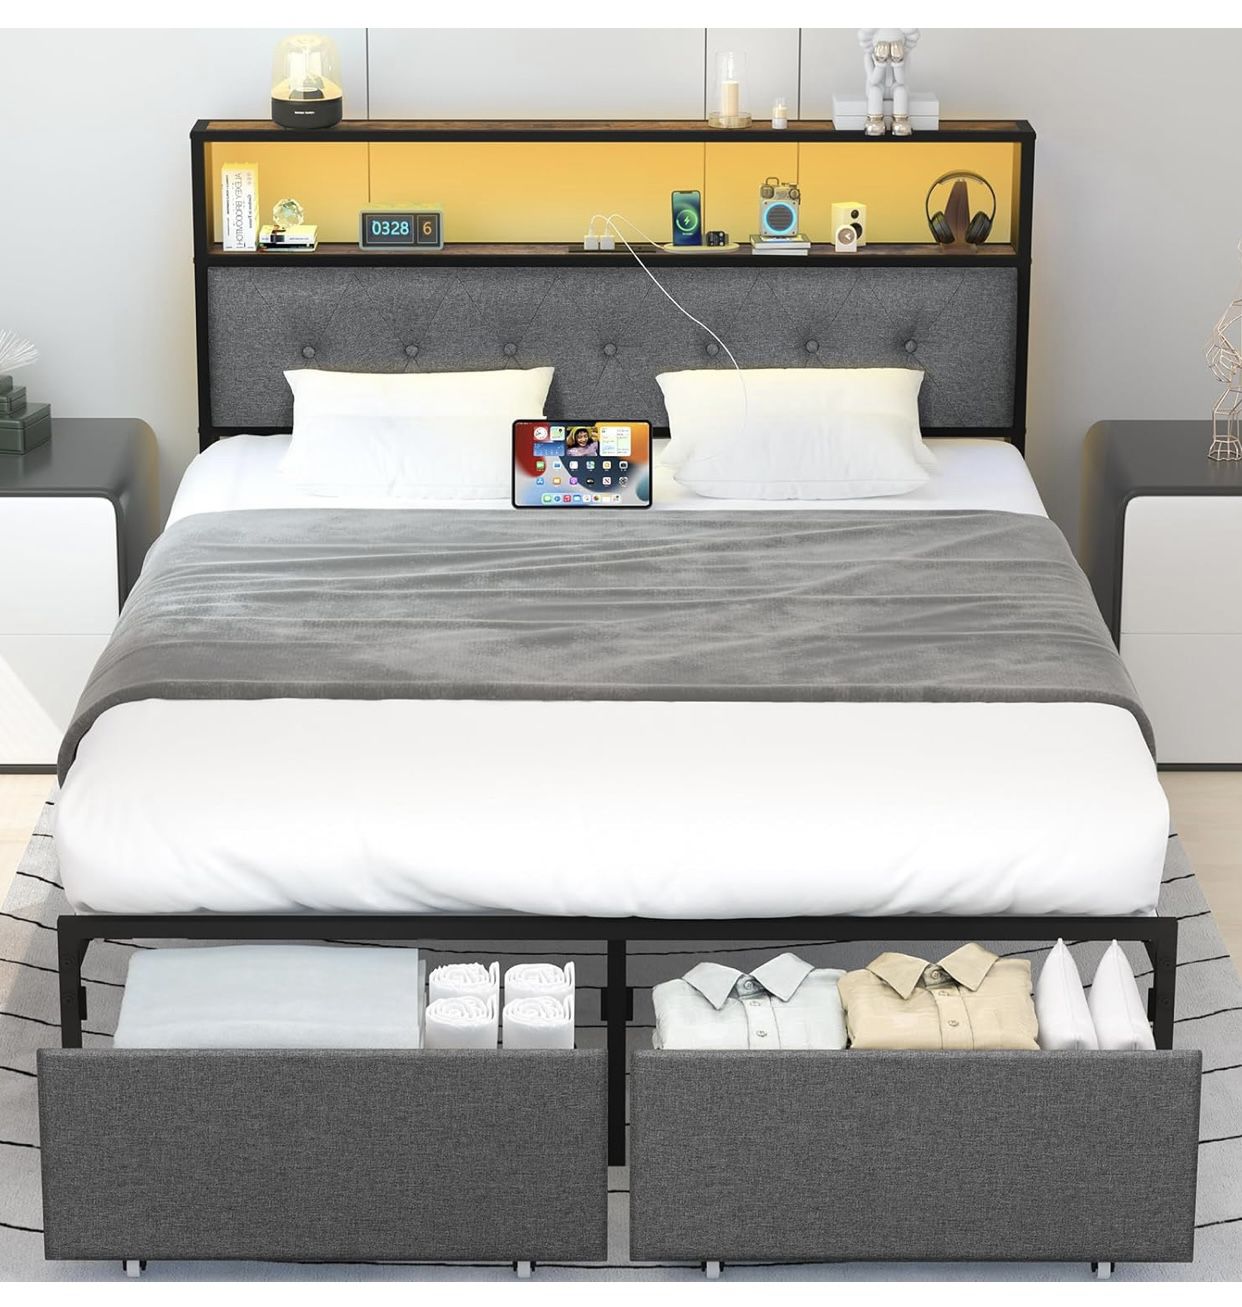 Bed Frame Queen Size, Metal Platform Queen Size Bed Frame with Headboard